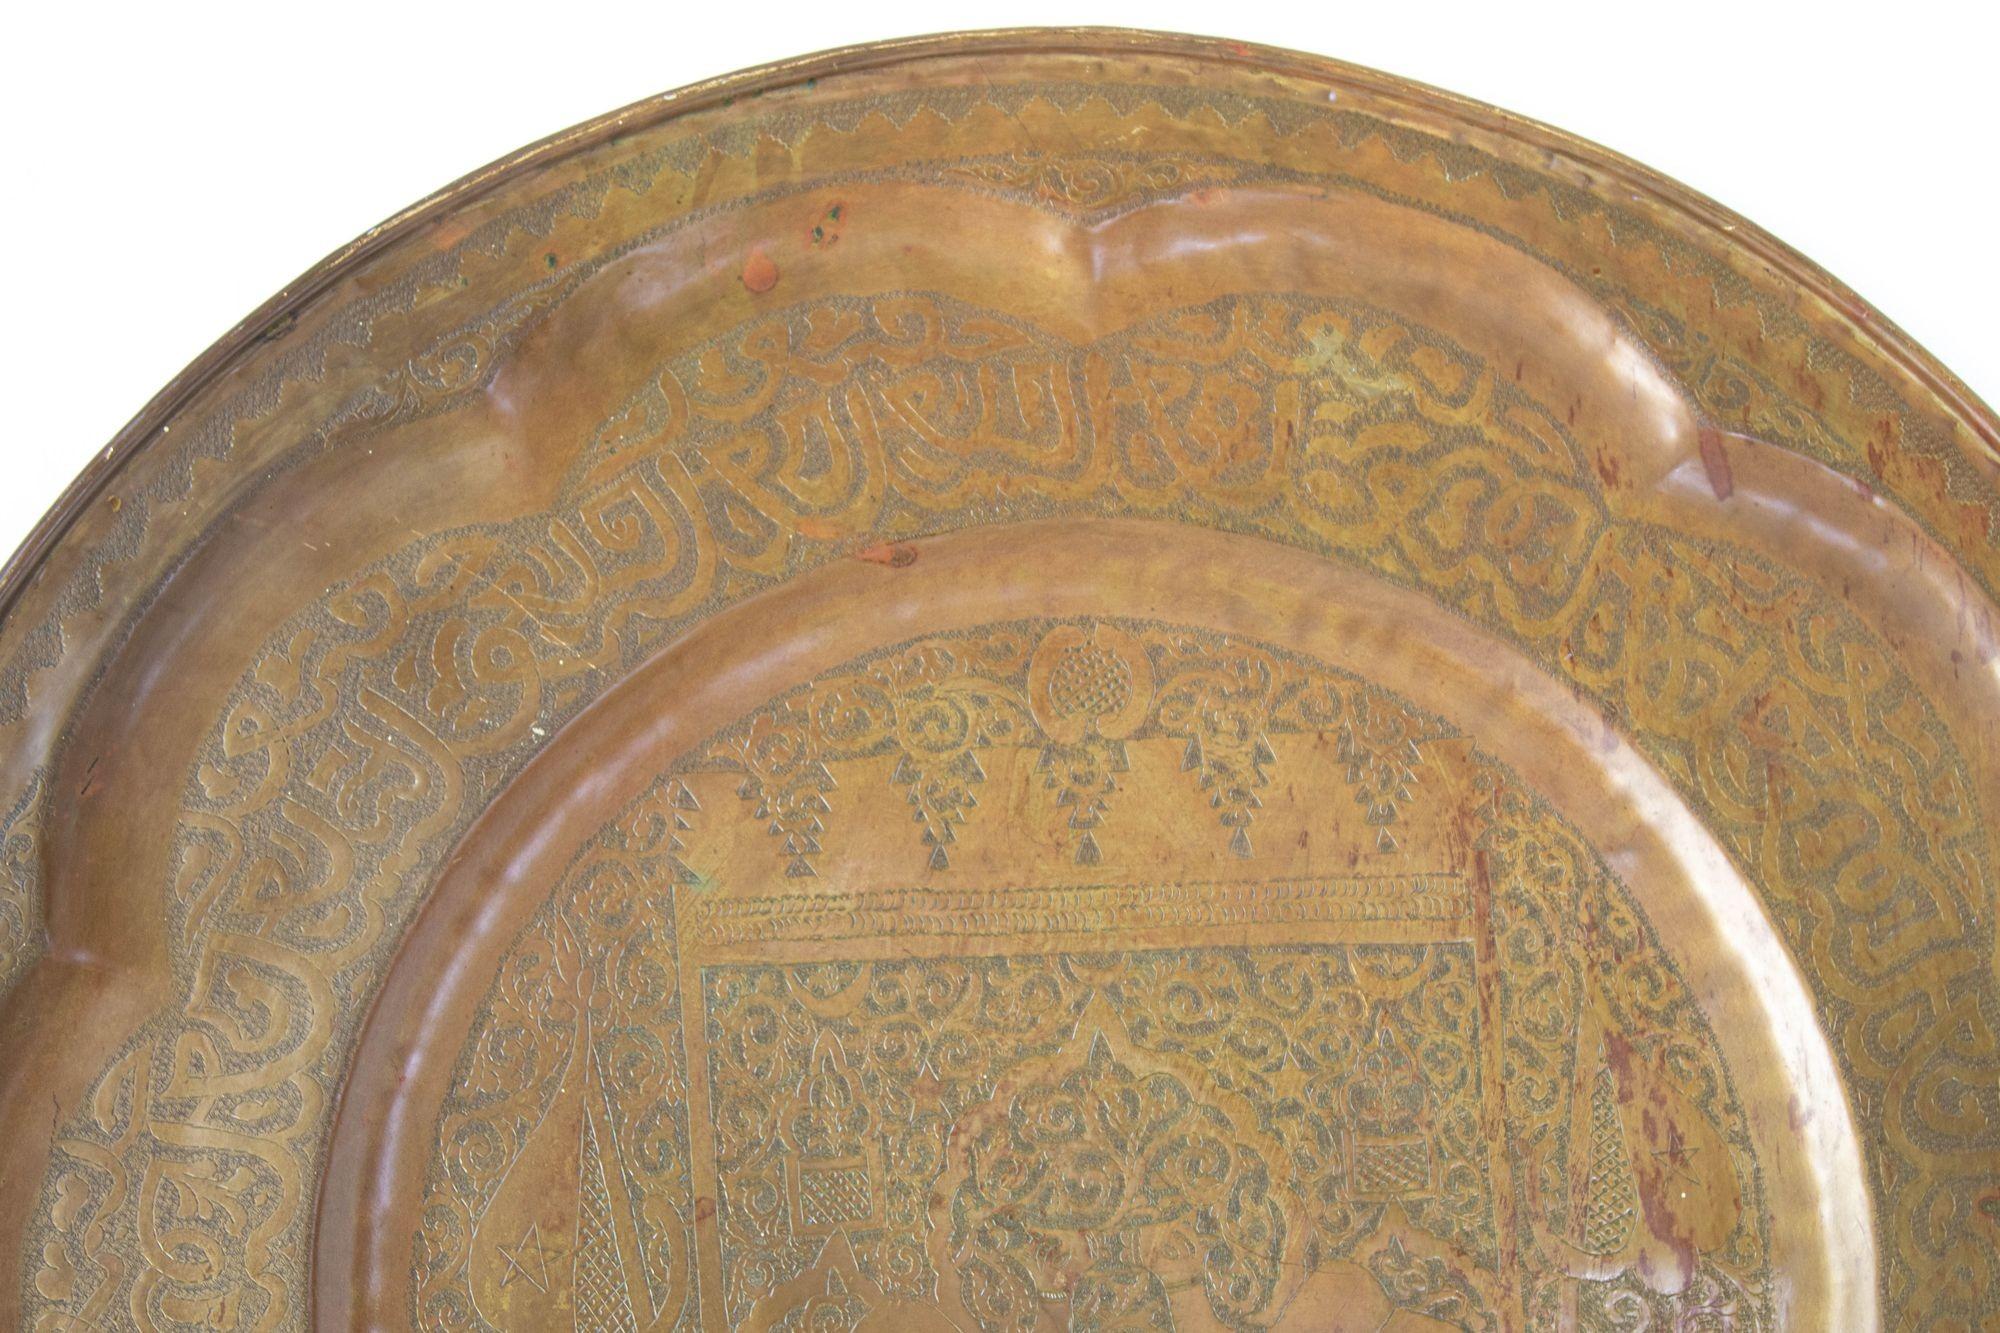 Large Moroccan Round Brass Tray Wall Decor, circa 1950s For Sale 5